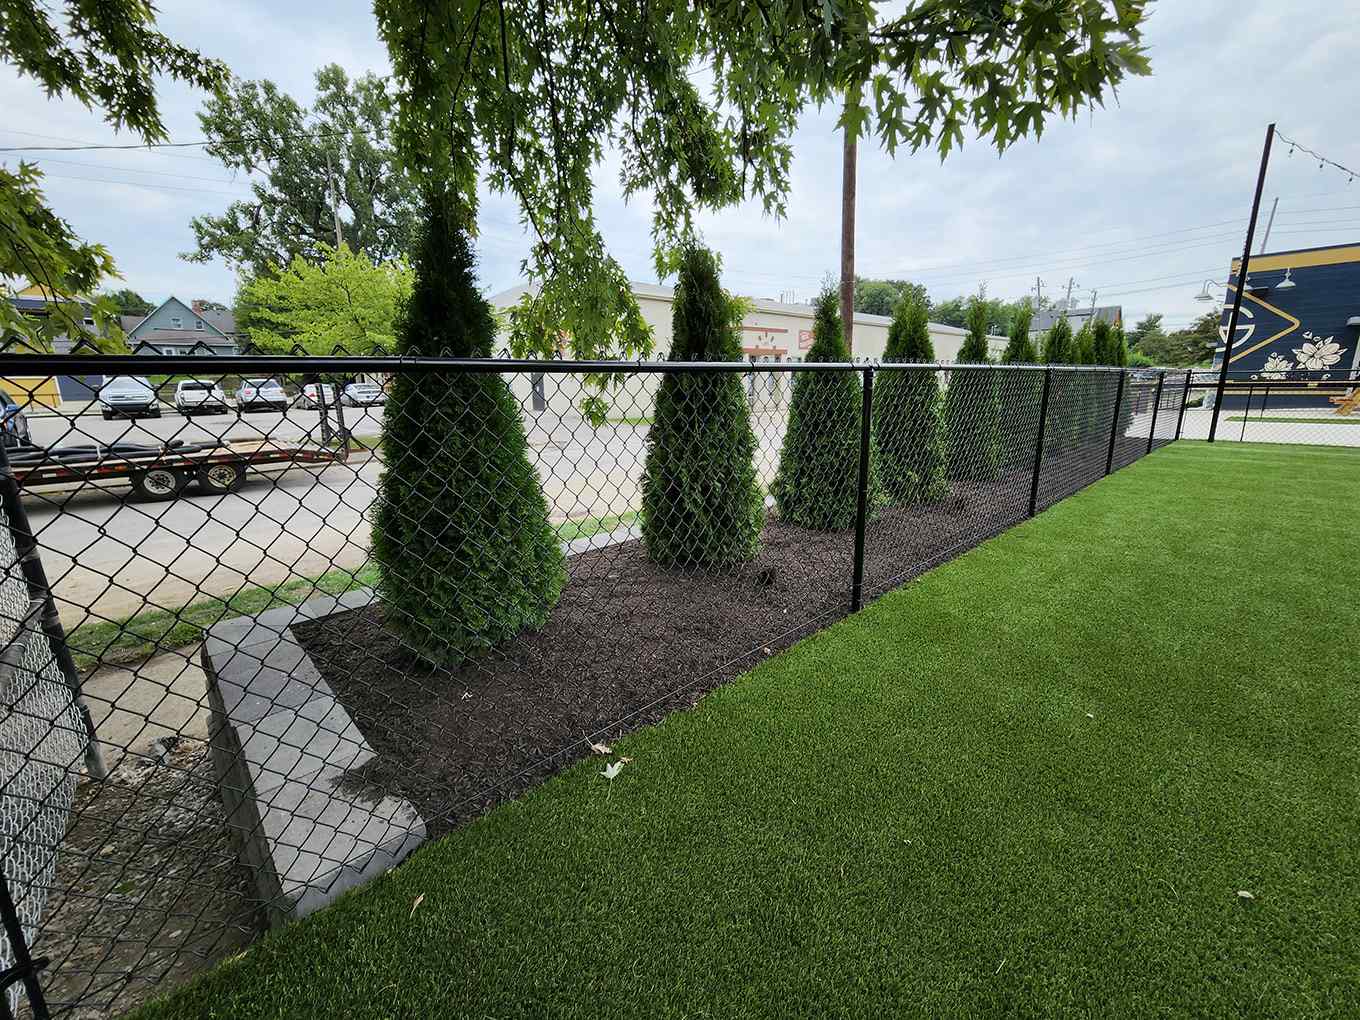 Commercial pet fences in Indianapolis, Indiana